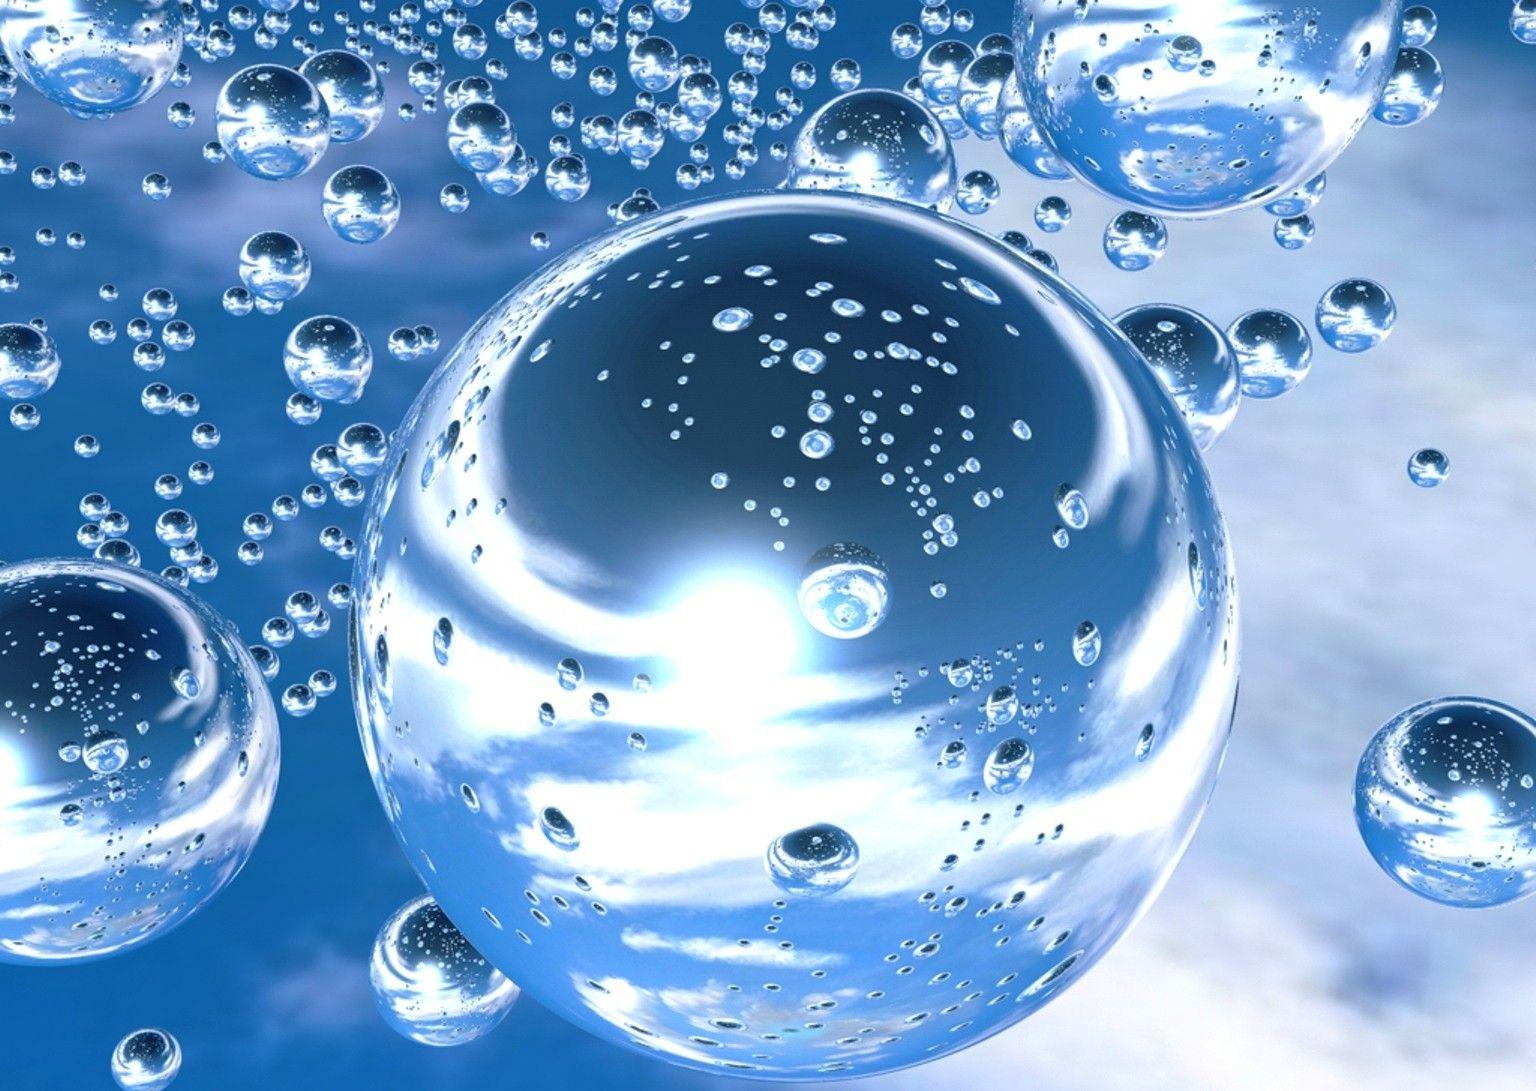 Bubble Wallpaper and Background Imagex1091